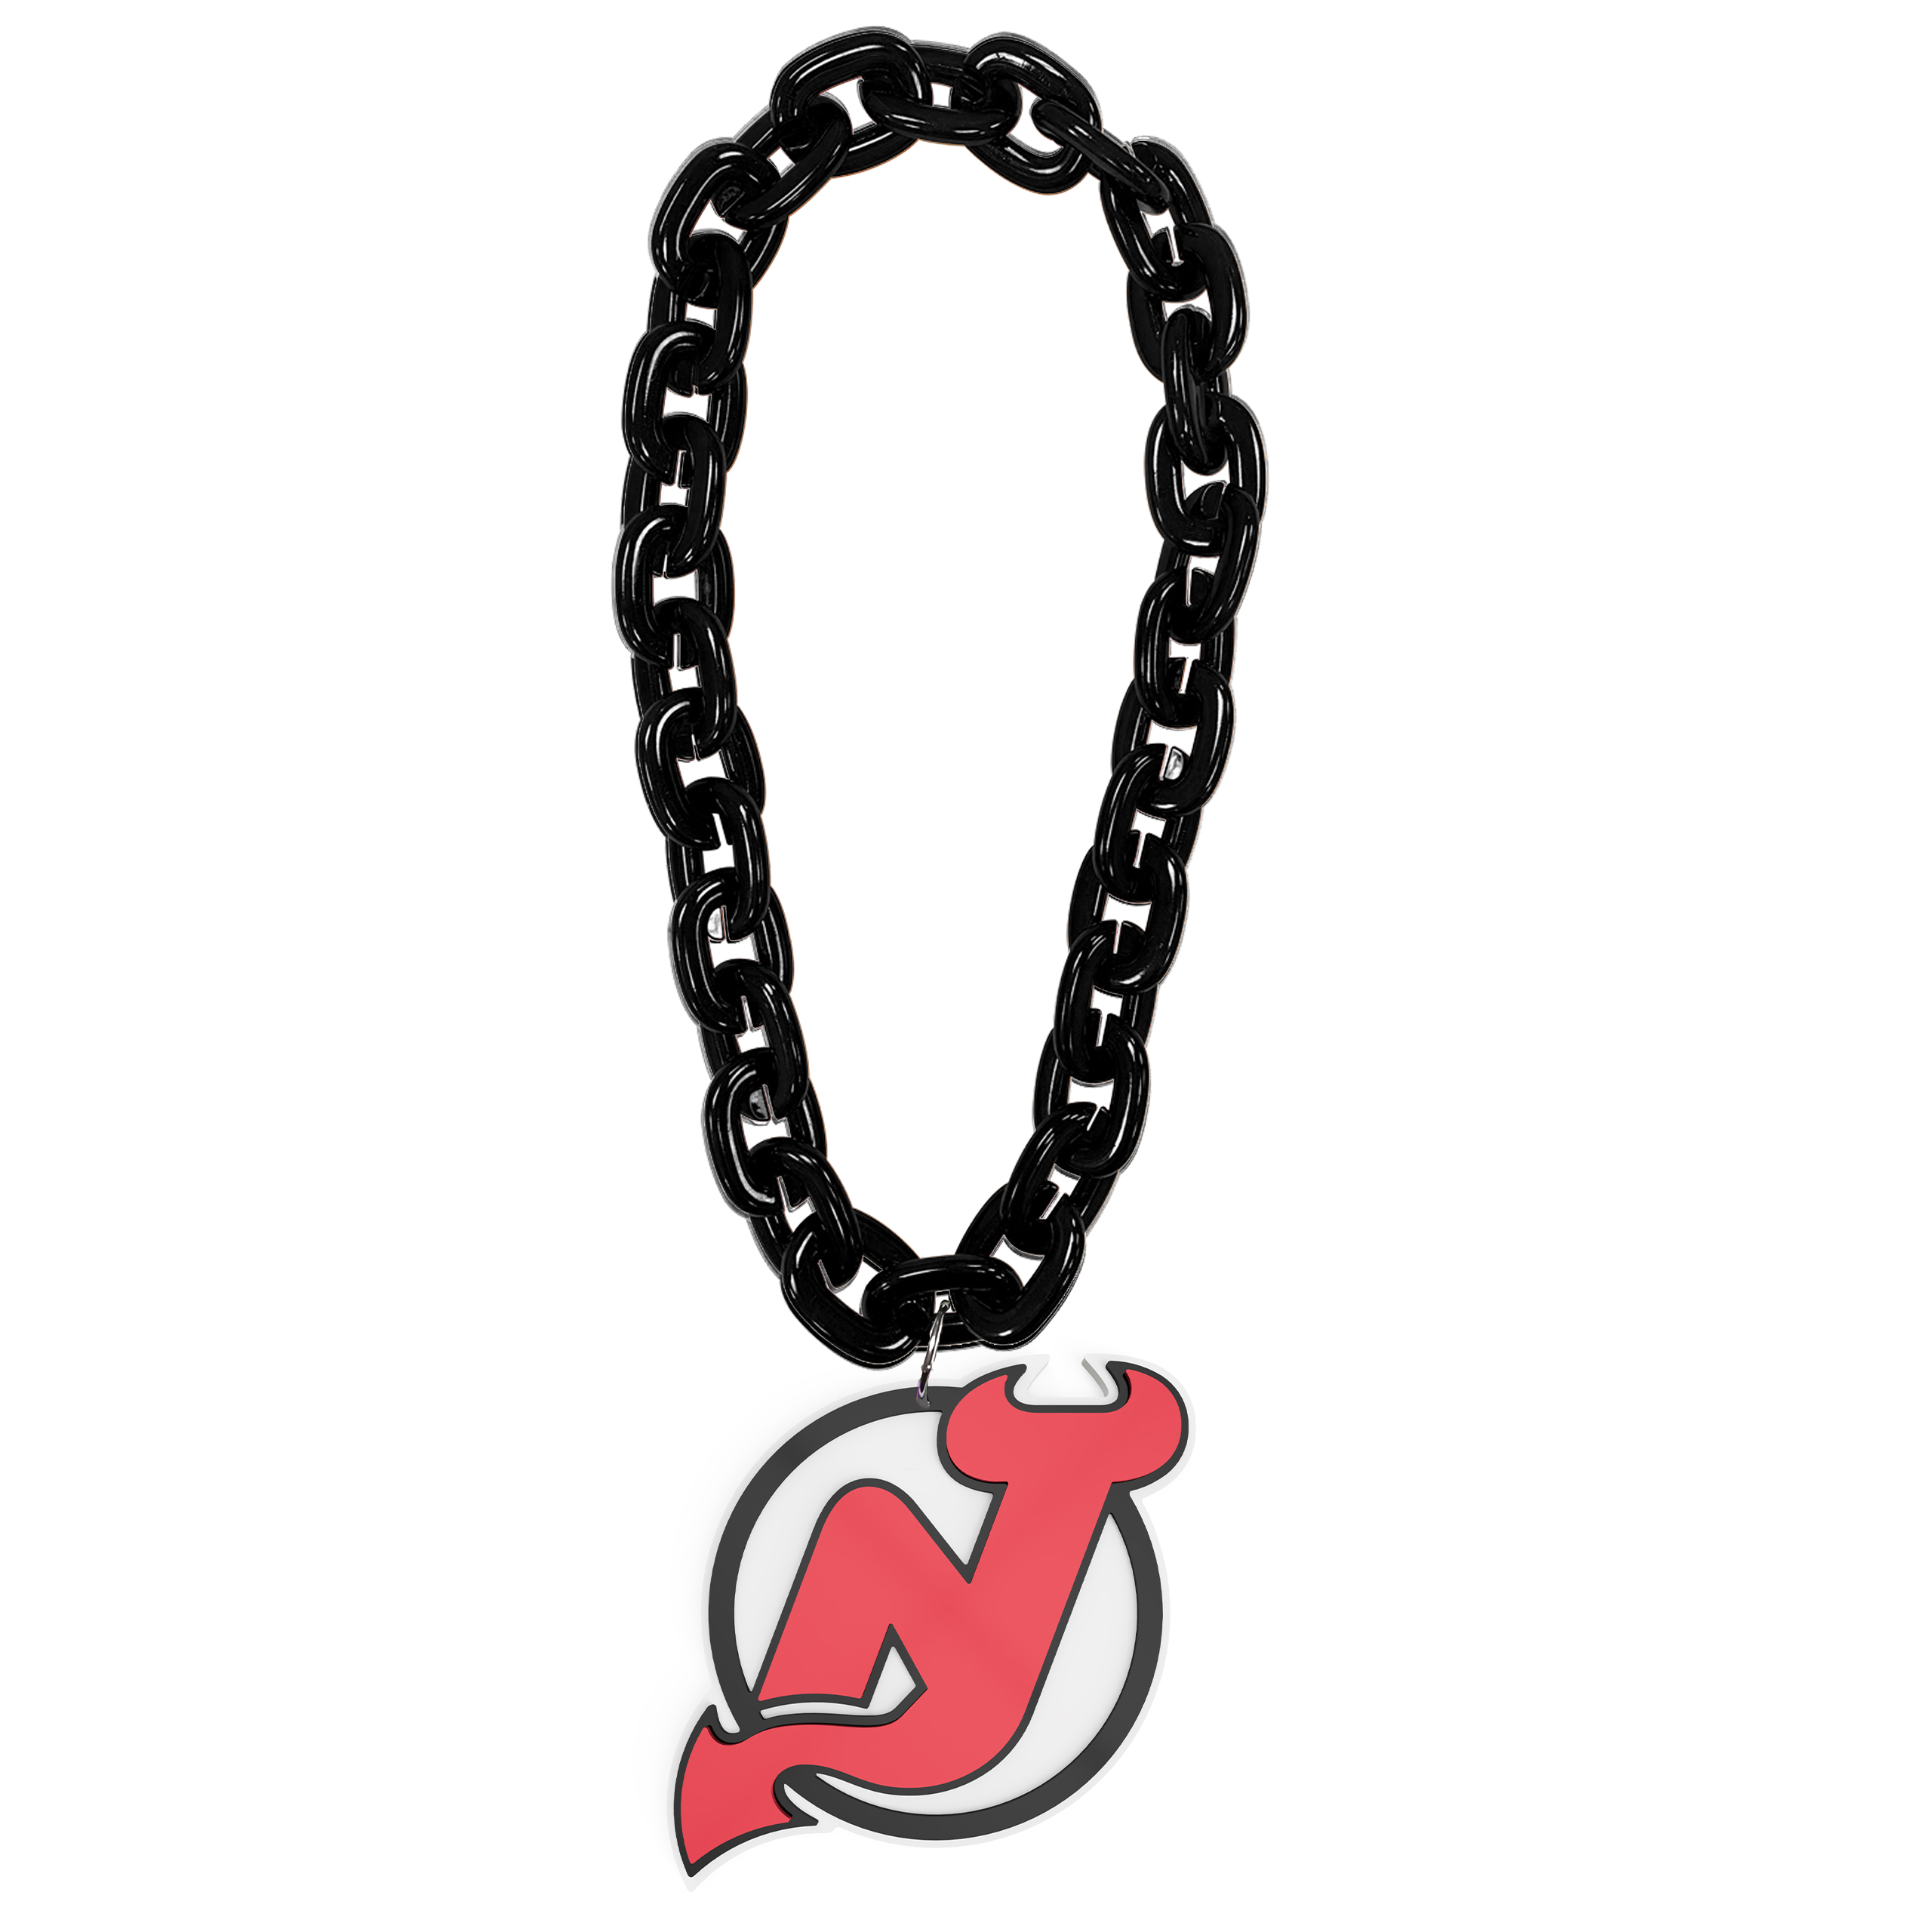 Officially Licensed New Jersey Devils All-Star Mat